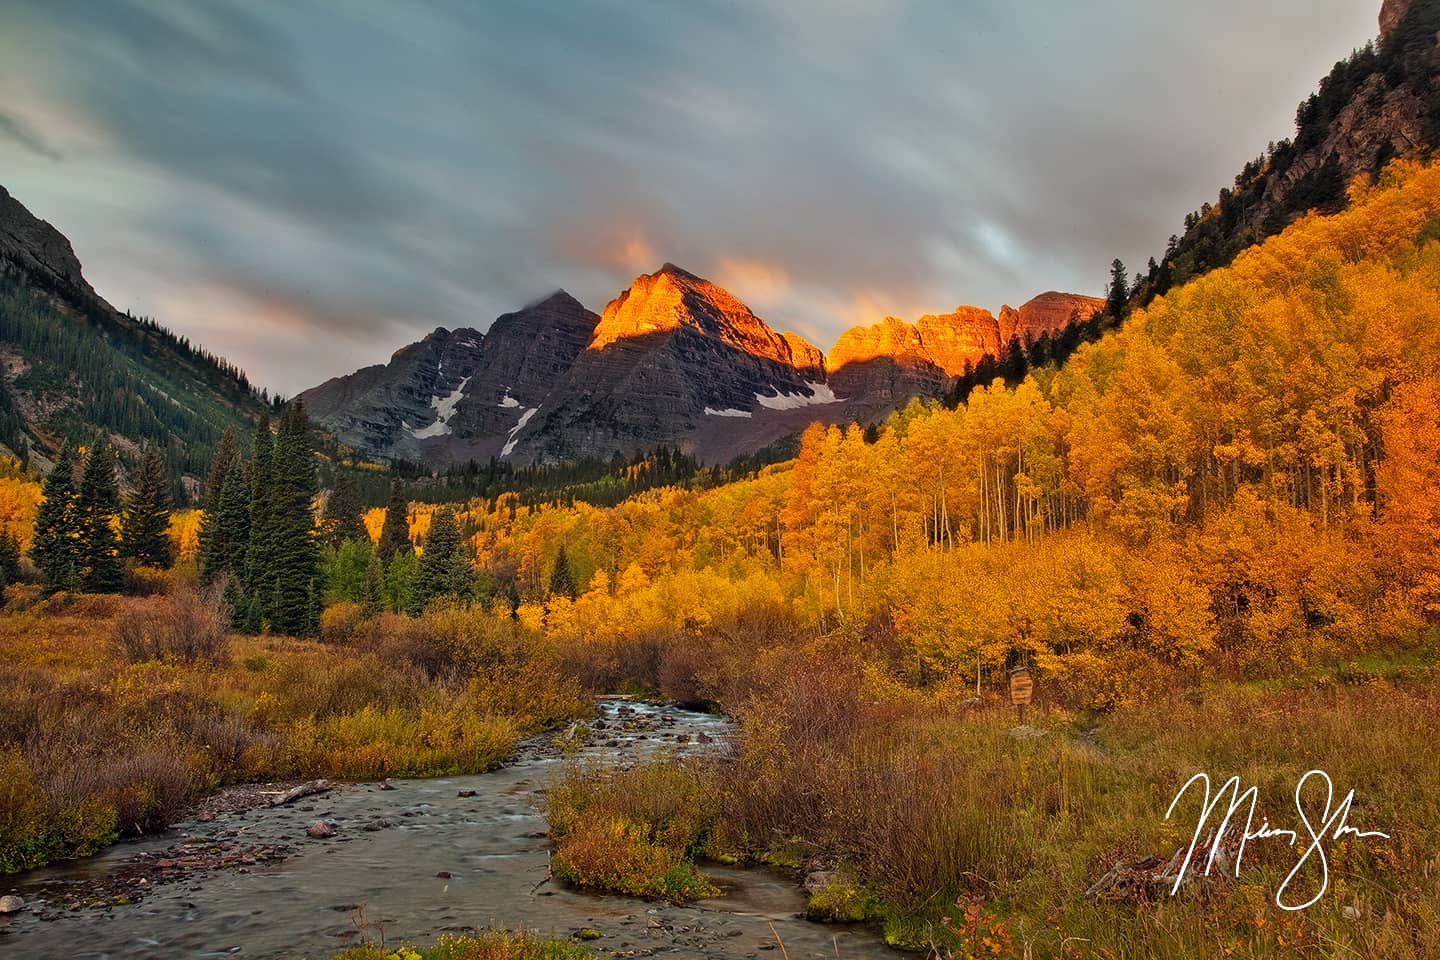 Fiery Sunrise at the Maroon Bells